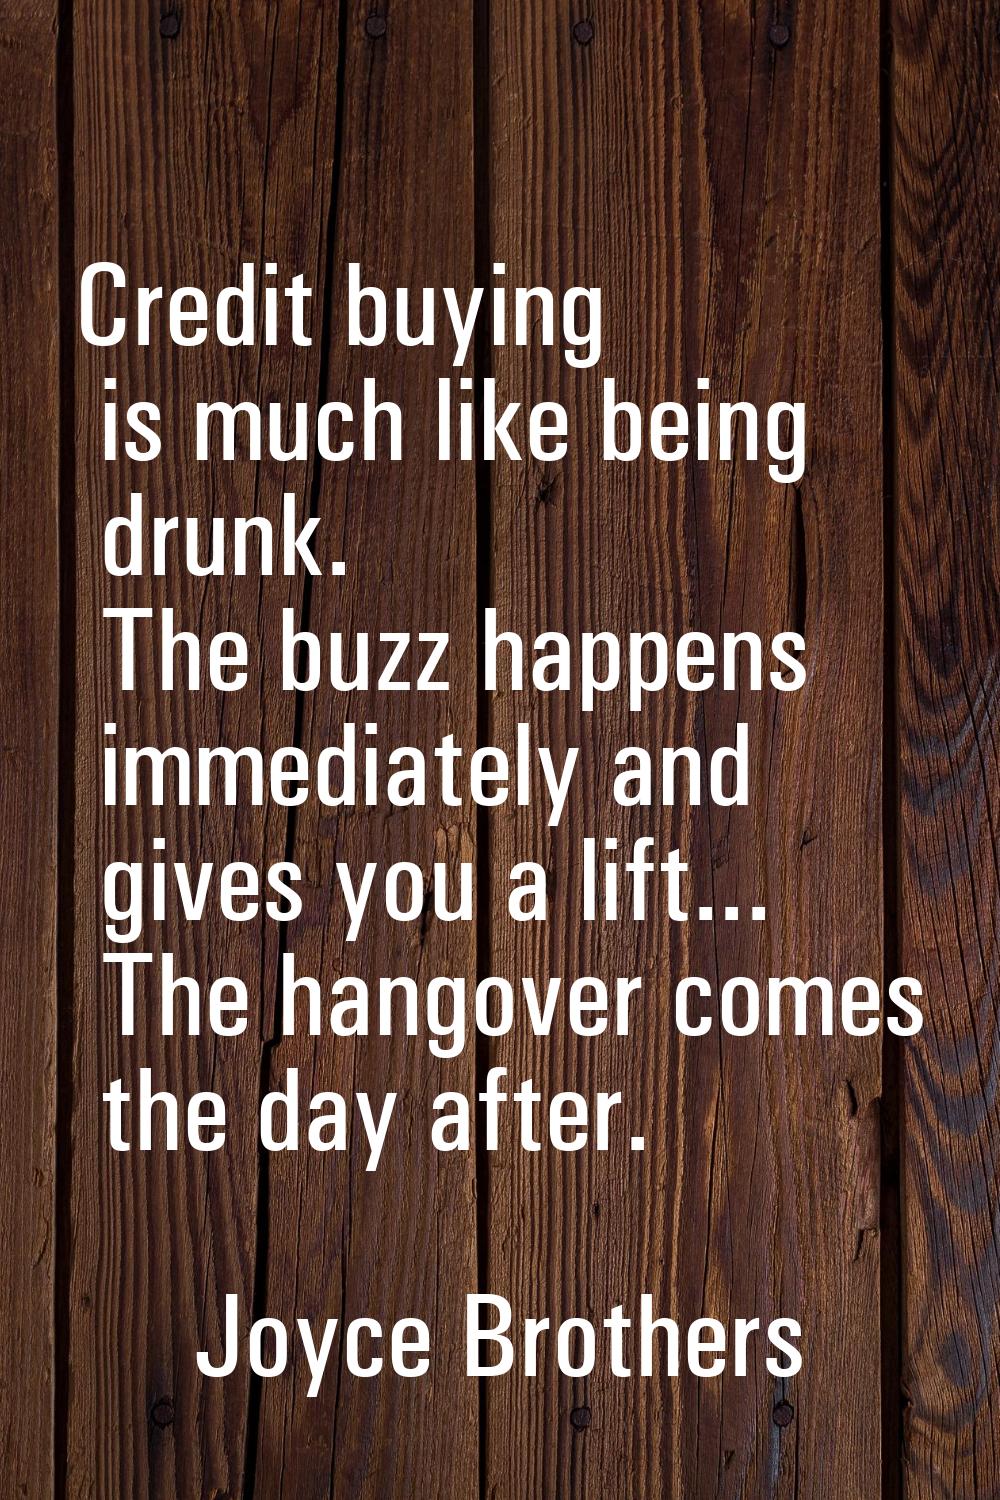 Credit buying is much like being drunk. The buzz happens immediately and gives you a lift... The ha